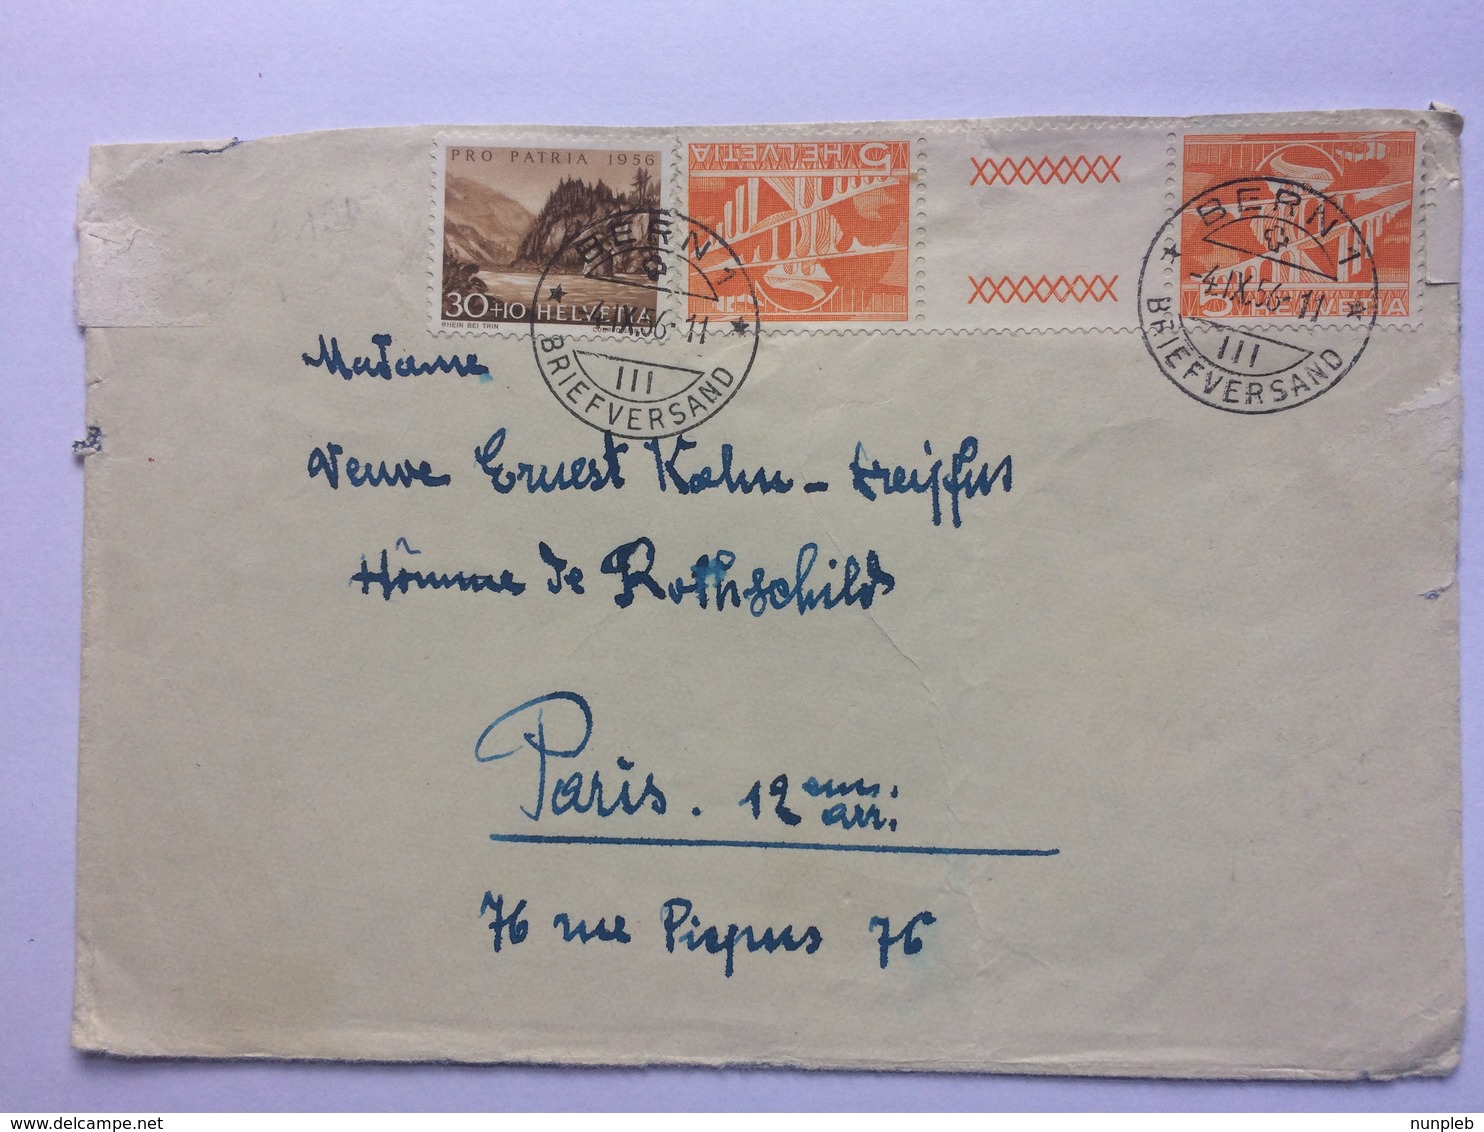 SWITZERLAND 1956 Cover Bern To Paris Tied With 1949 Landscape Tete Beche And Pro Patria 1956 - Covers & Documents